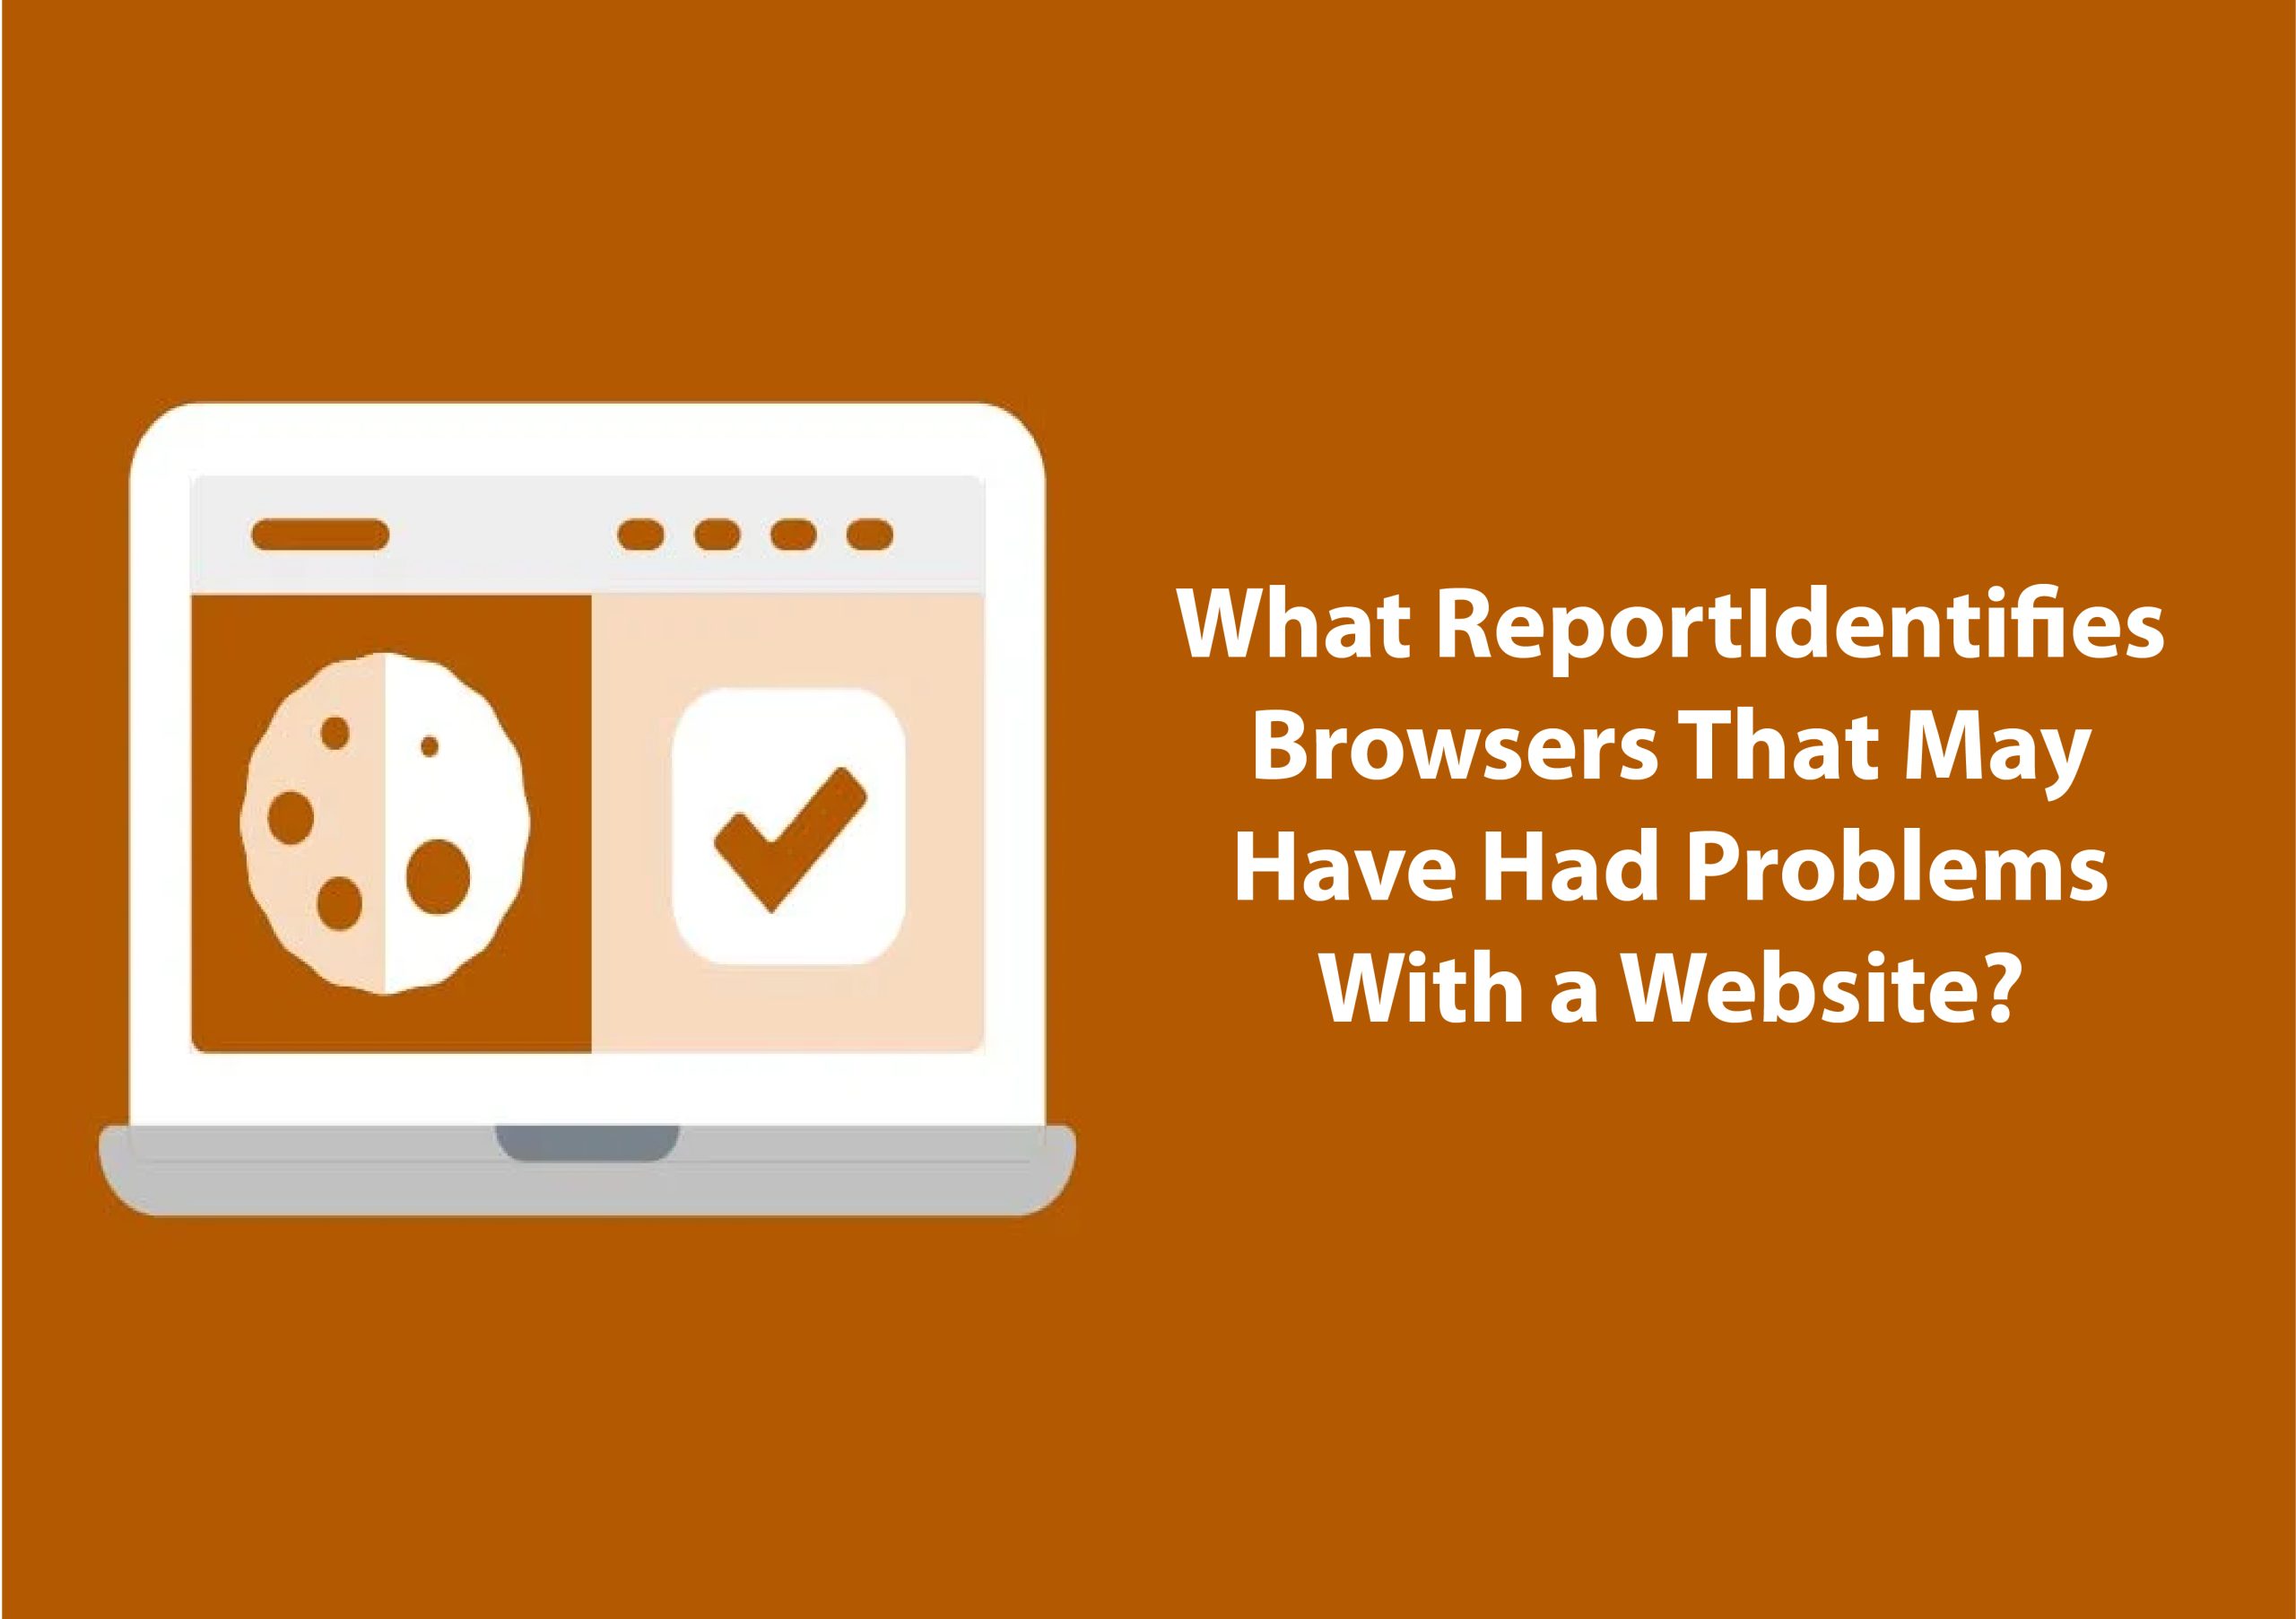 What Report Identifies Browsers That May Have Had Problems With a Website?